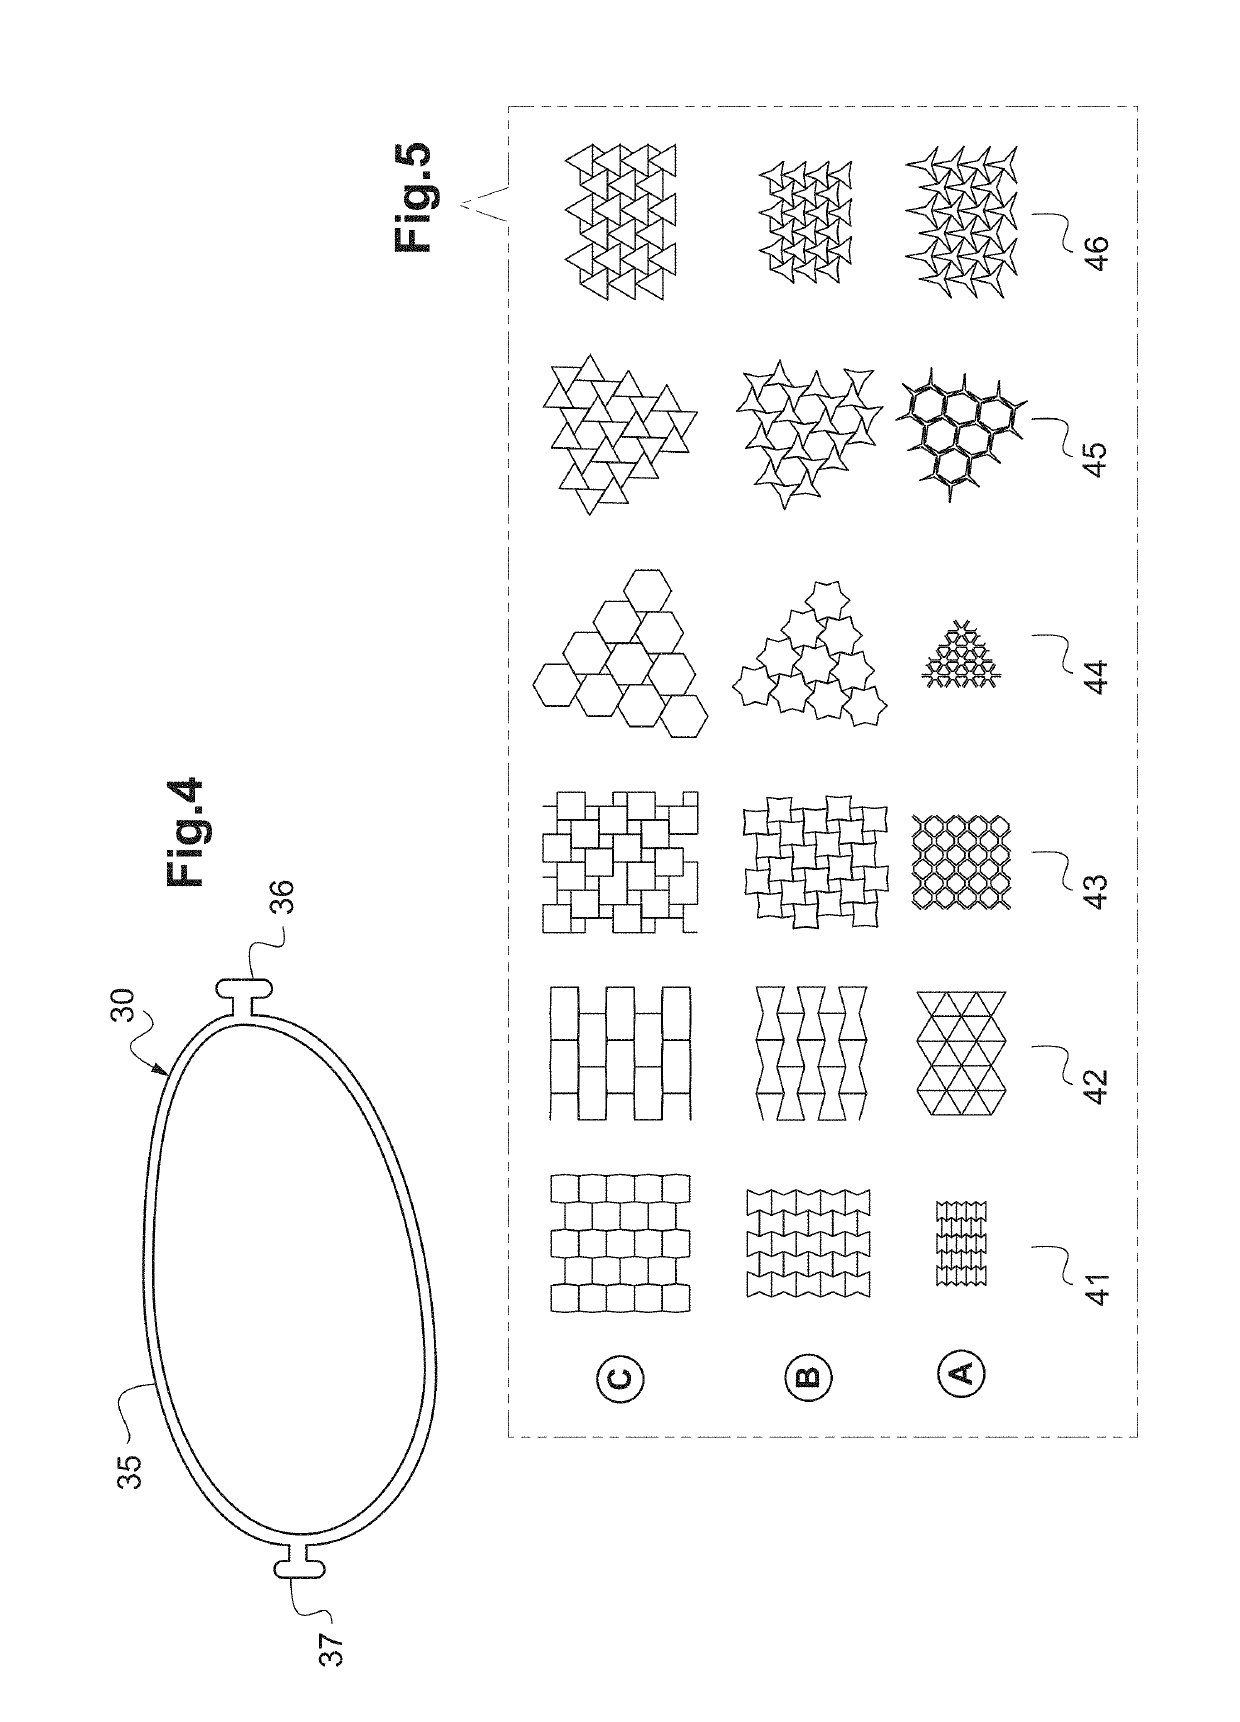 Eyeglasses equipment including a joint and method for manufacturing such an eyeglasses equipment